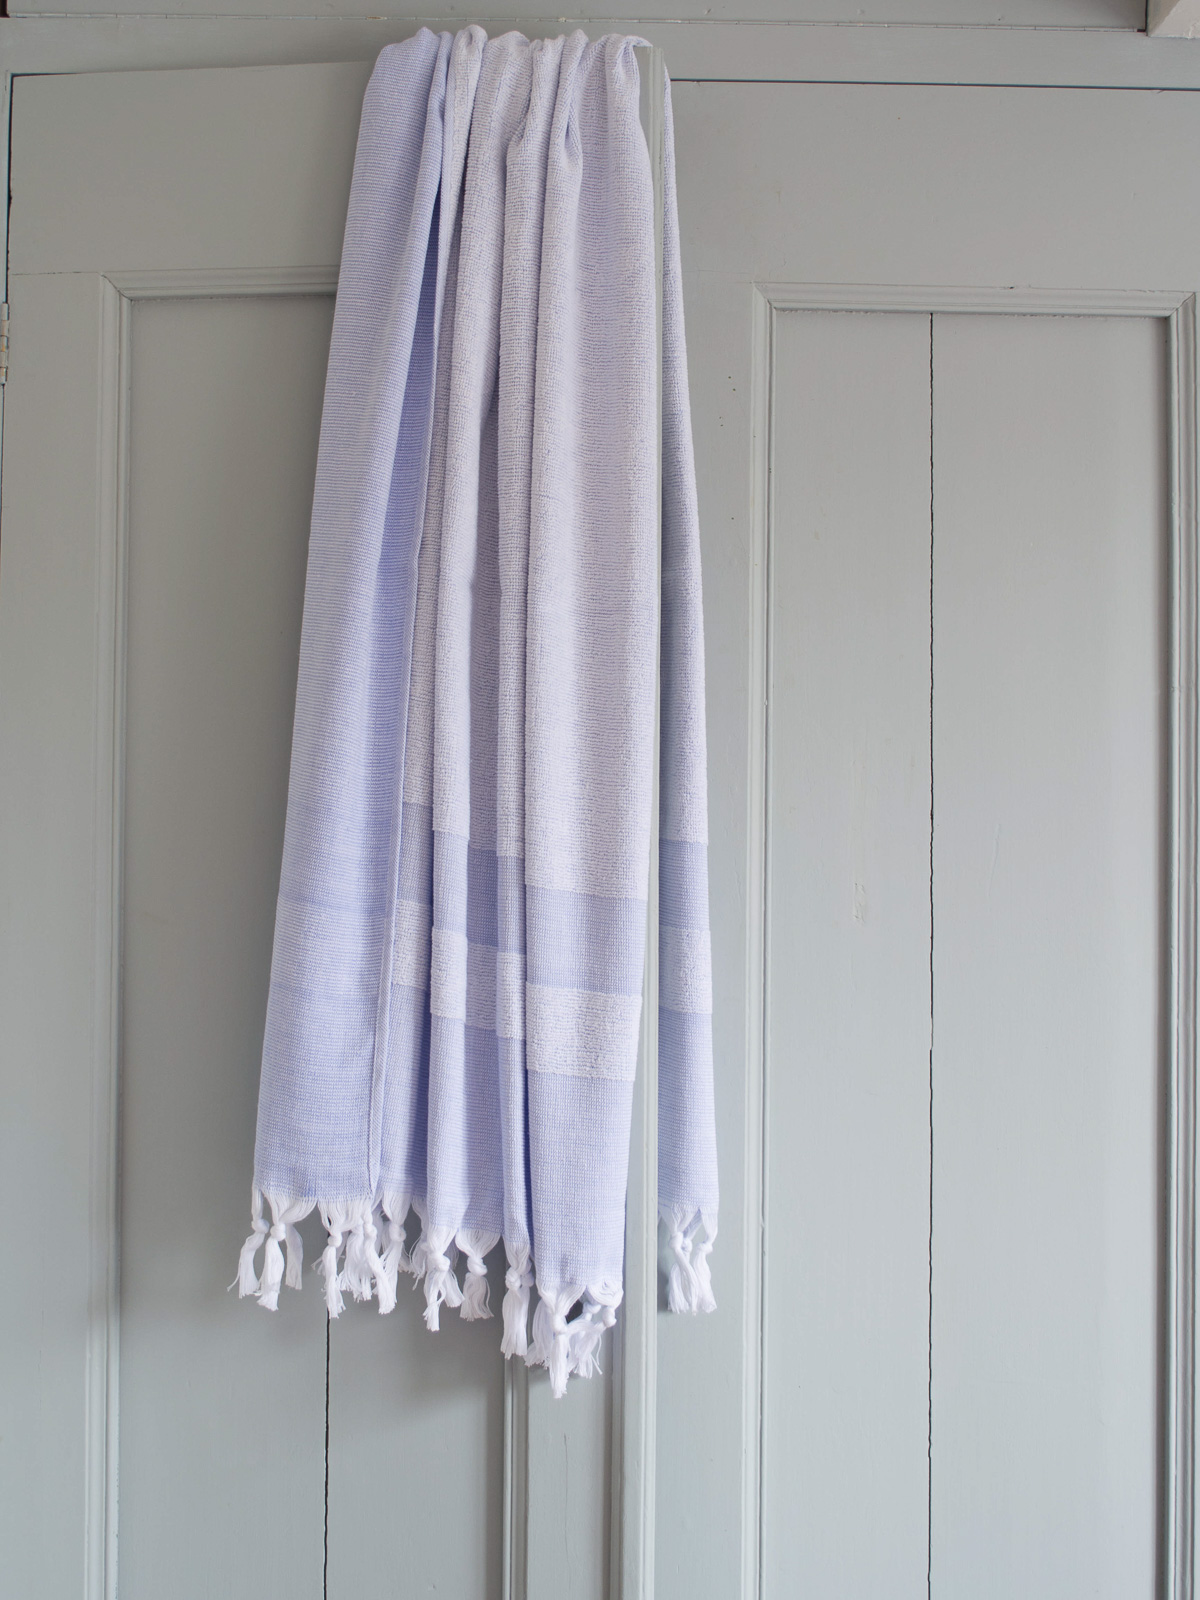 hamam towel with terry cloth, lavender blue